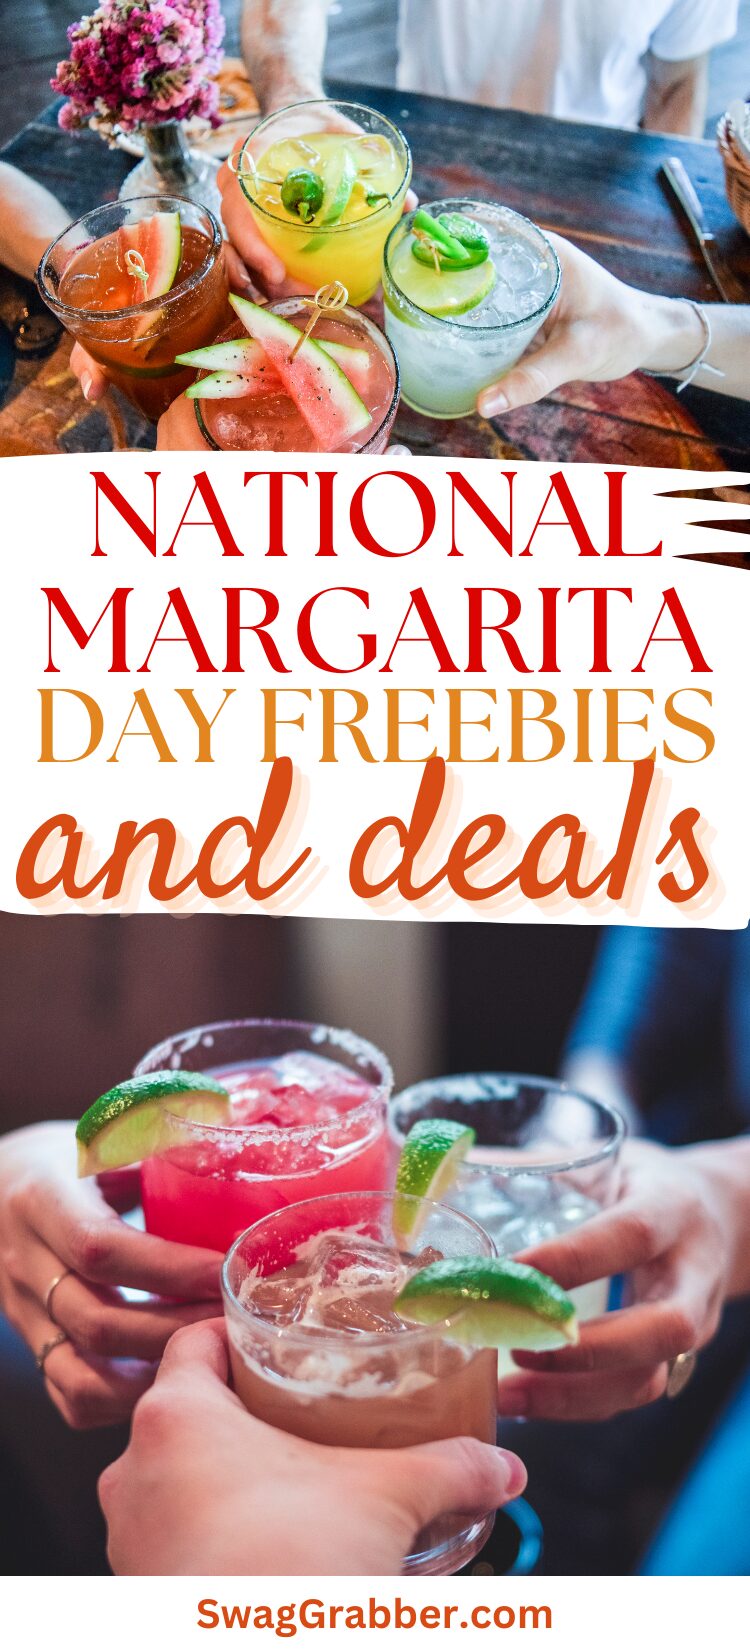 margarita day freebies and deals pin